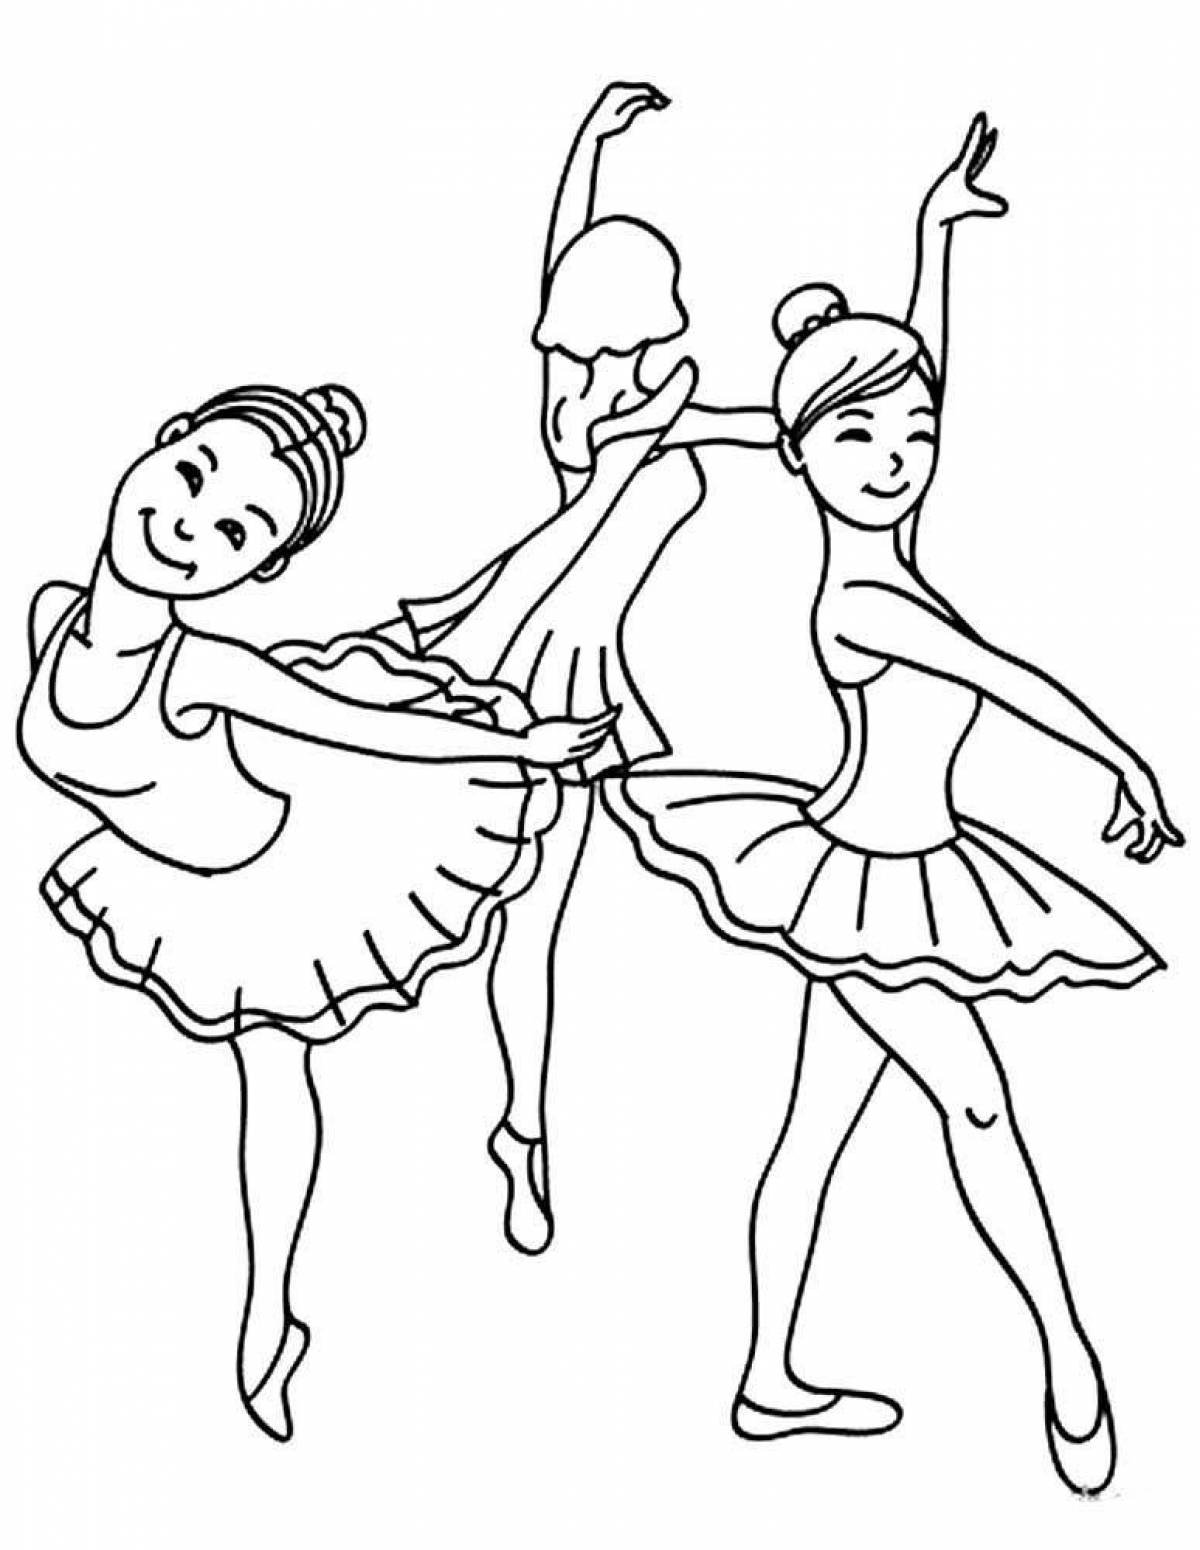 Fabulous ballerina coloring pages for kids